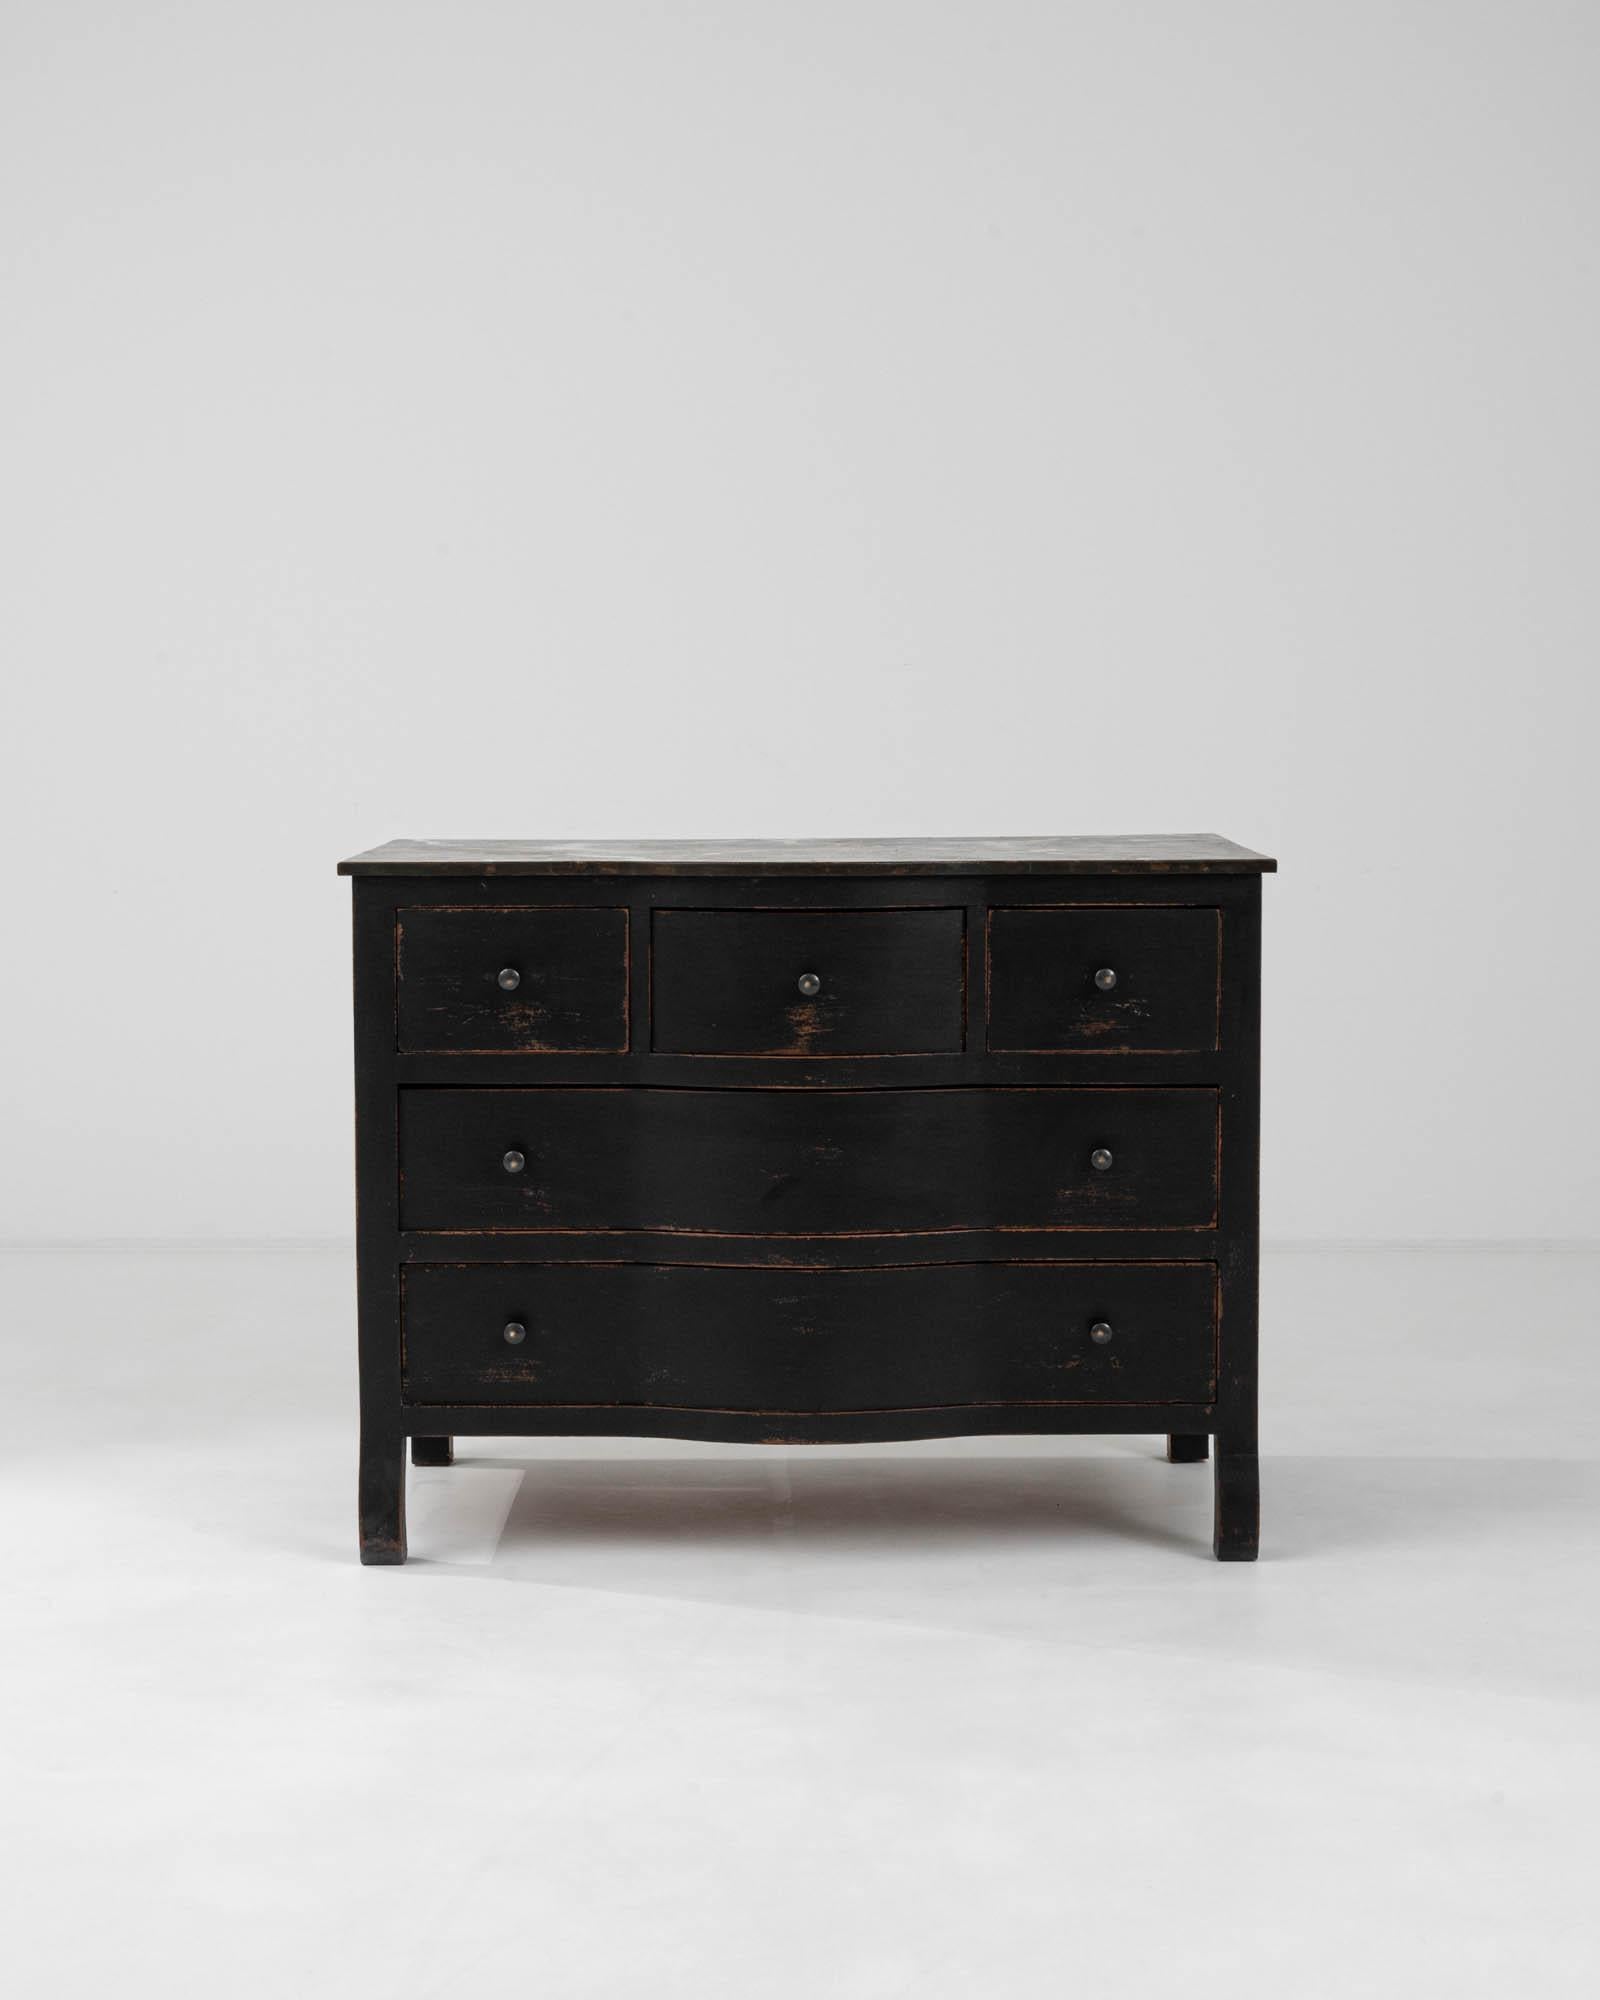 This early 20th Century French wood chest of drawers exudes a rich sense of history with its black patinated finish, offering a striking statement piece for any room. The chest features a classic design with elegant curves and a stately stance,